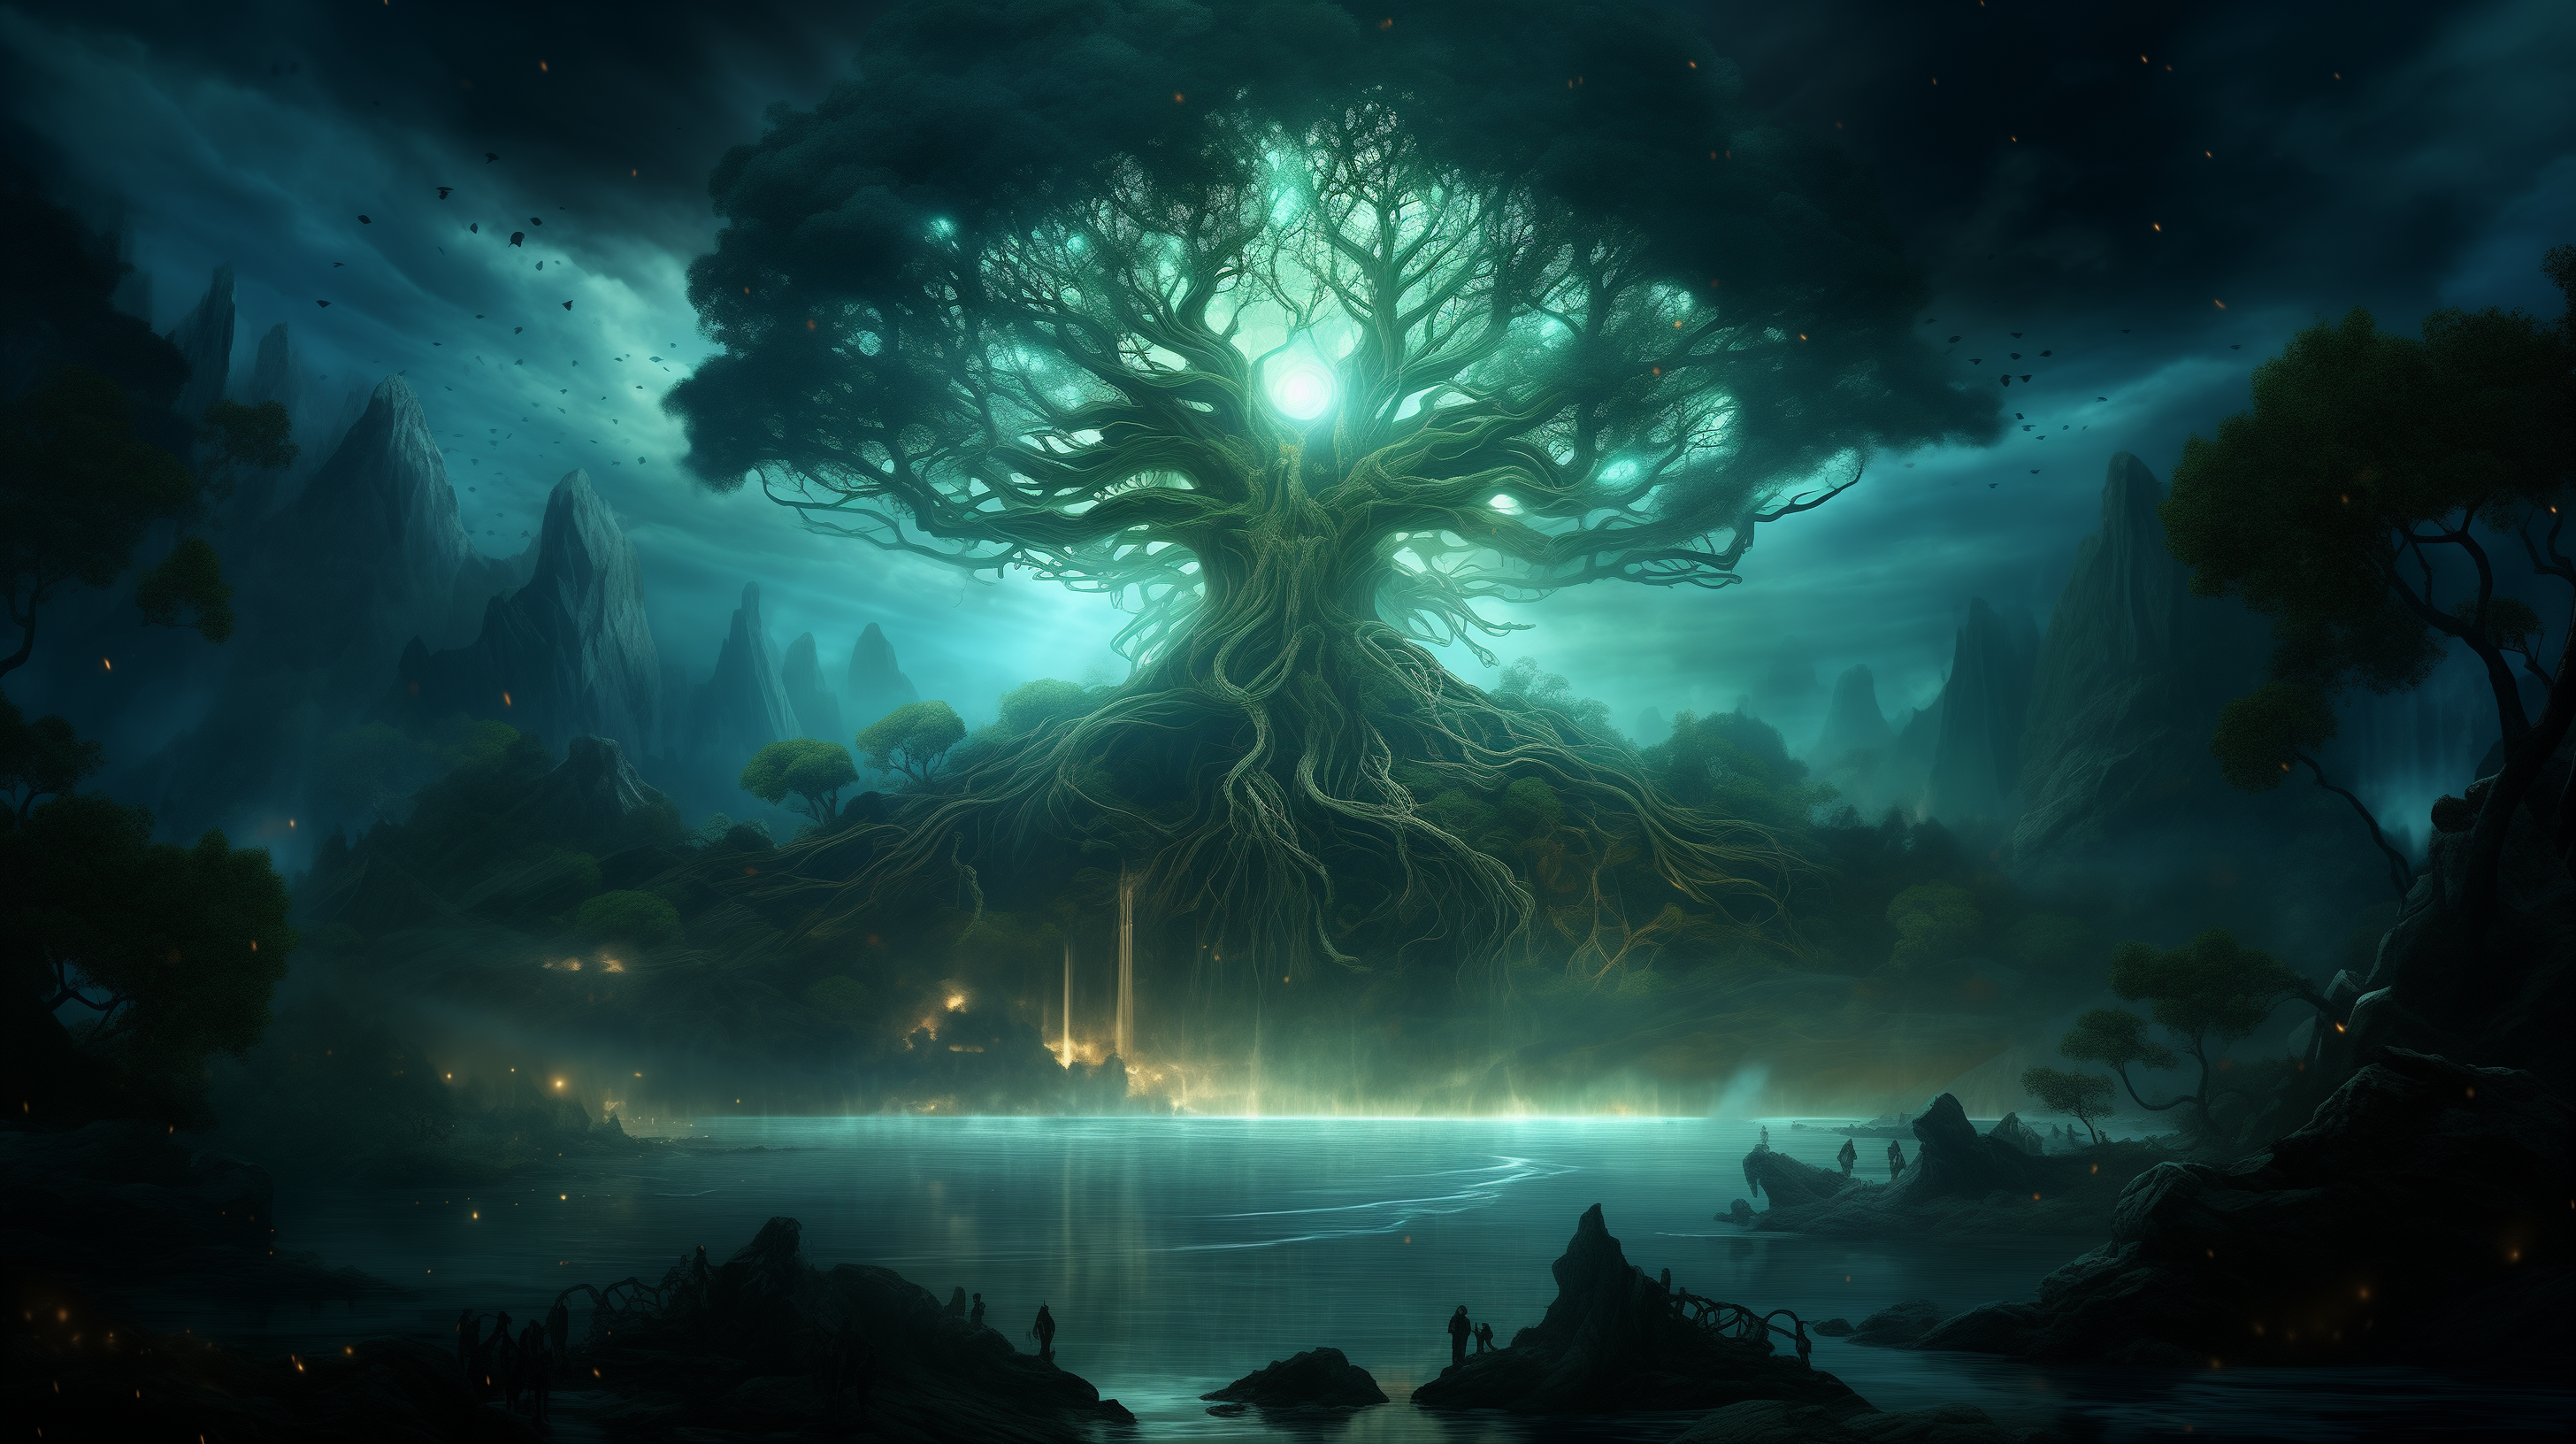 HD wallpaper of mystical Yggdrasil tree with glowing light in a magical forest setting for desktop background.